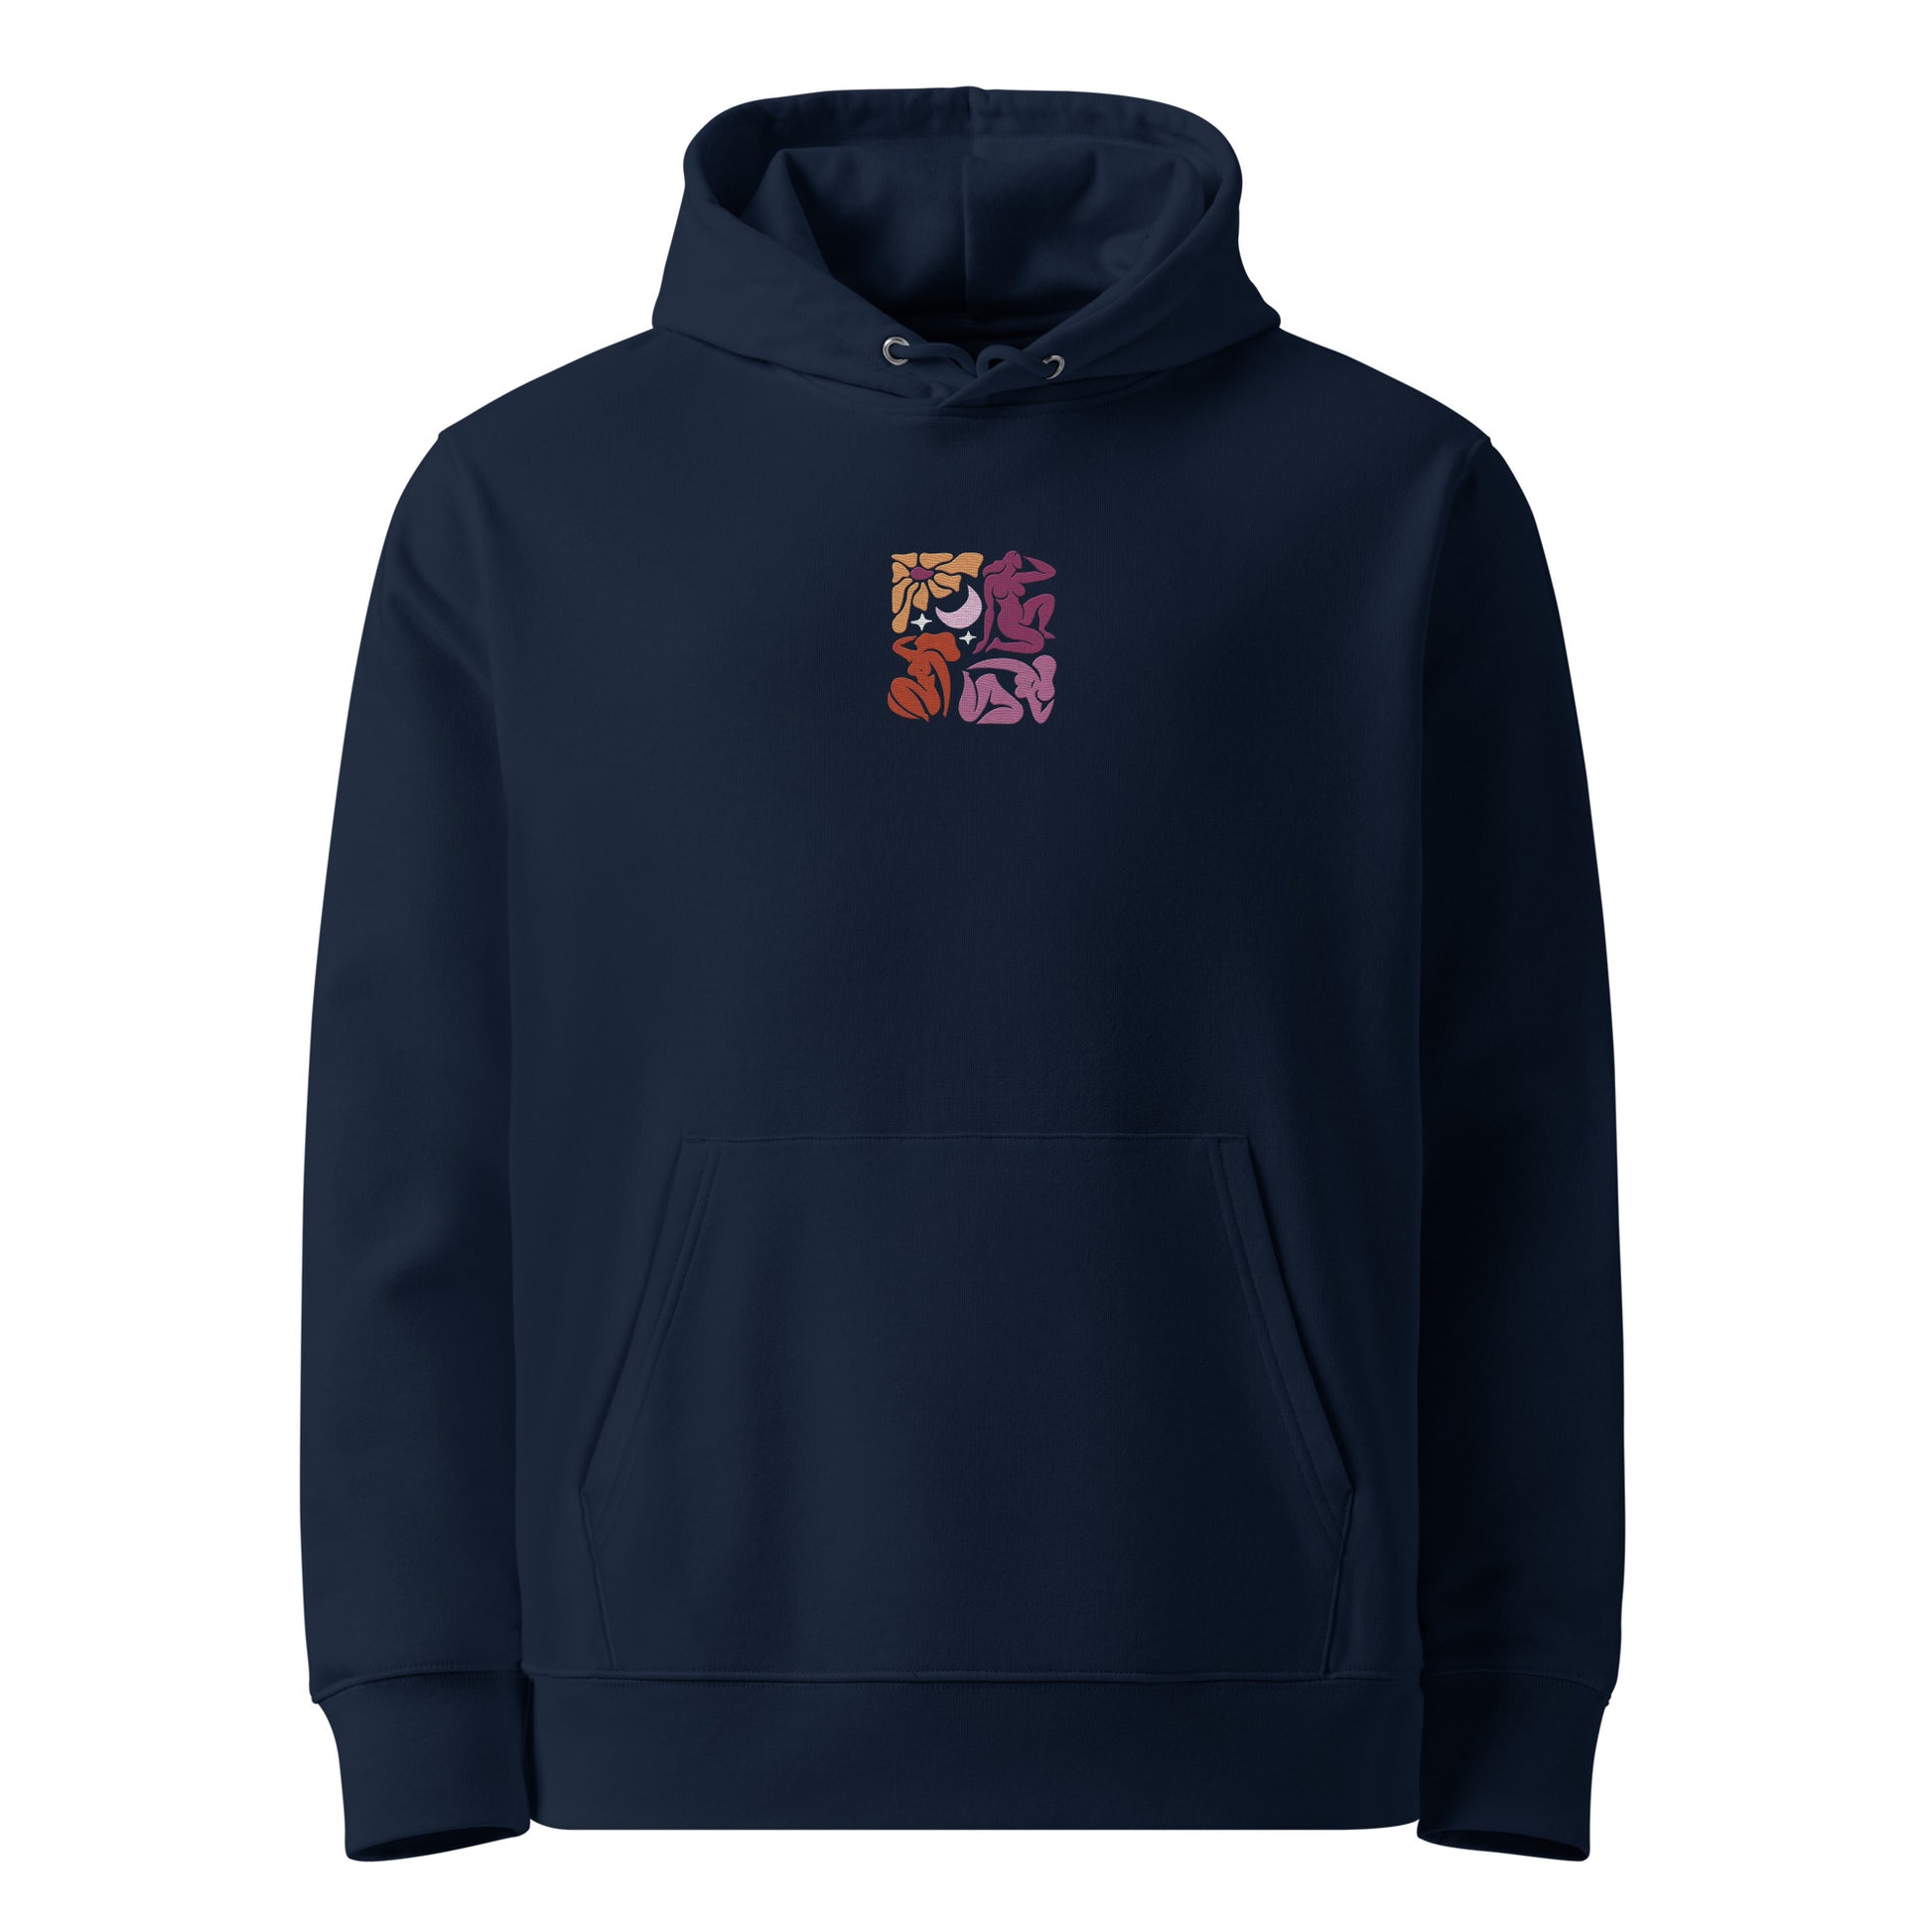 Unisex eco-friendly french navy hoodie featuring an embroidered Matisse mosaic-inspired design centered chest in lesbian colors, with the same design printed large on the back - adding a touch of lgbtq to your outfit. sizes: small, medium, large, extra large, double extra large.